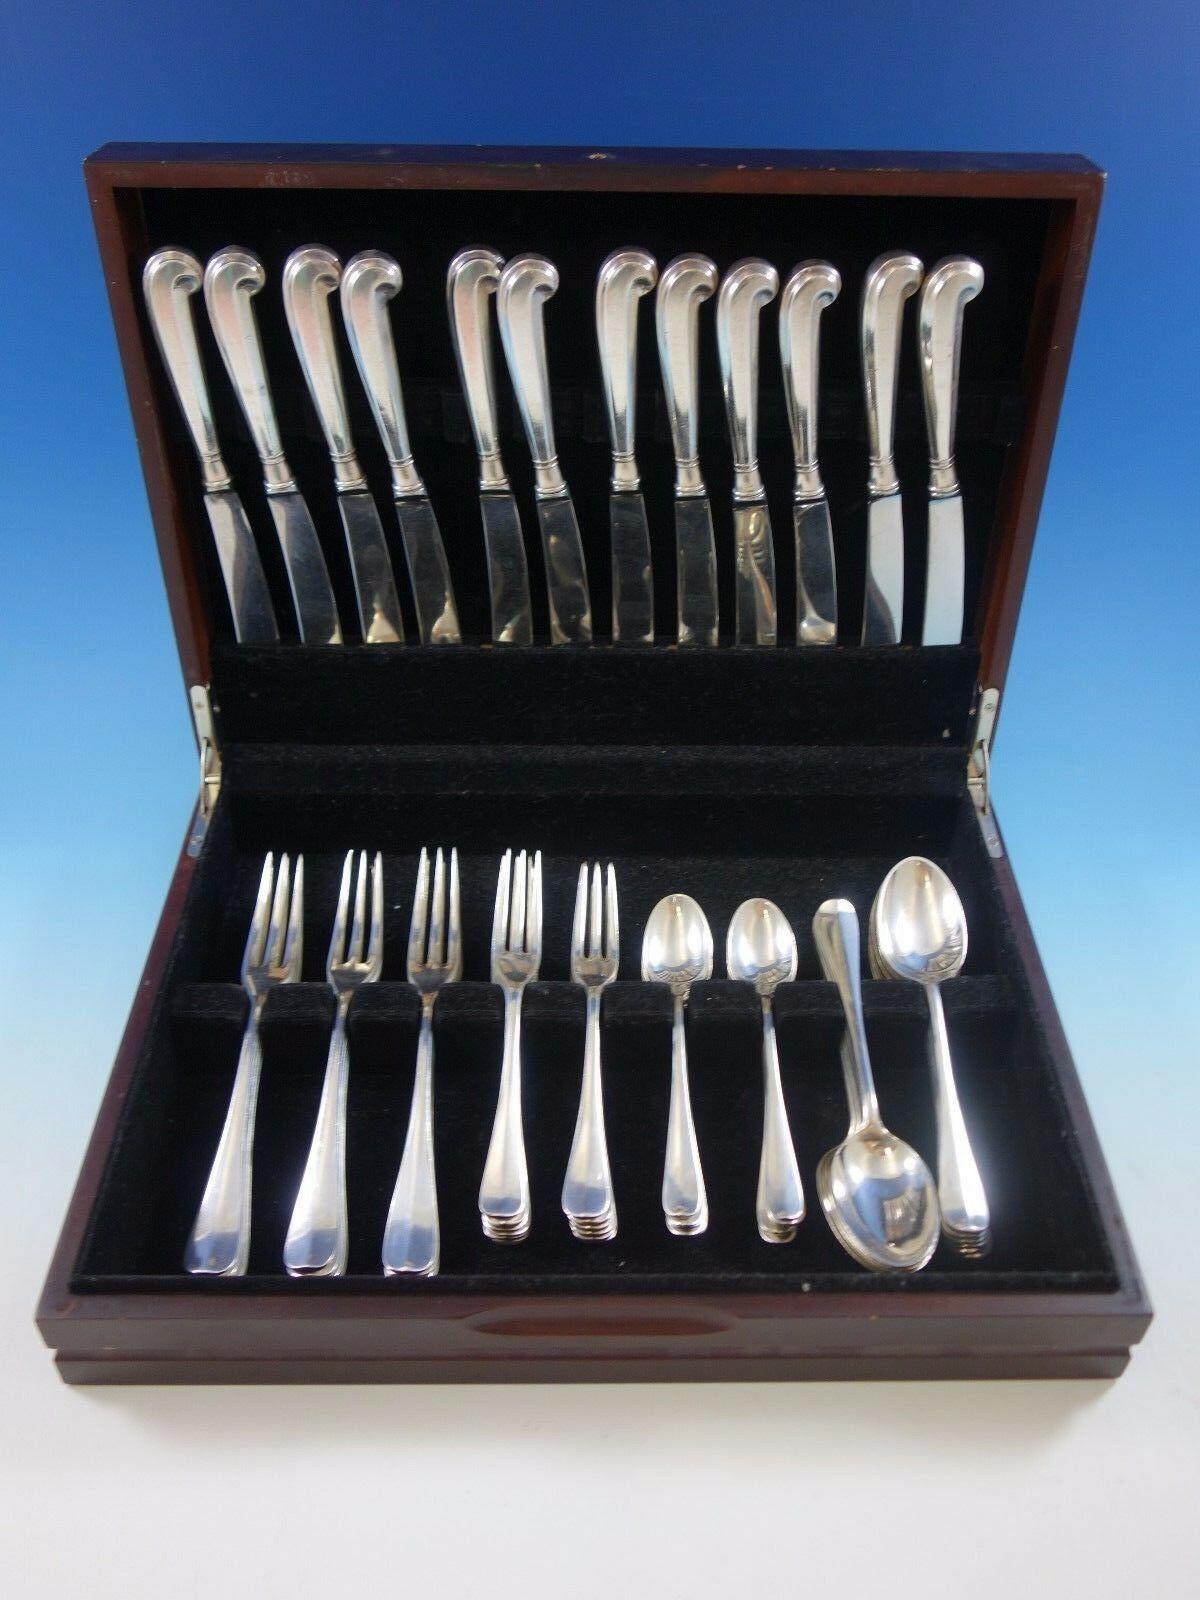 Queen Anne-Williamsburg by Stieff sterling silver flatware set, 60 pieces. This set includes:

12 dinner knives, pistol grip handle, 9 3/8